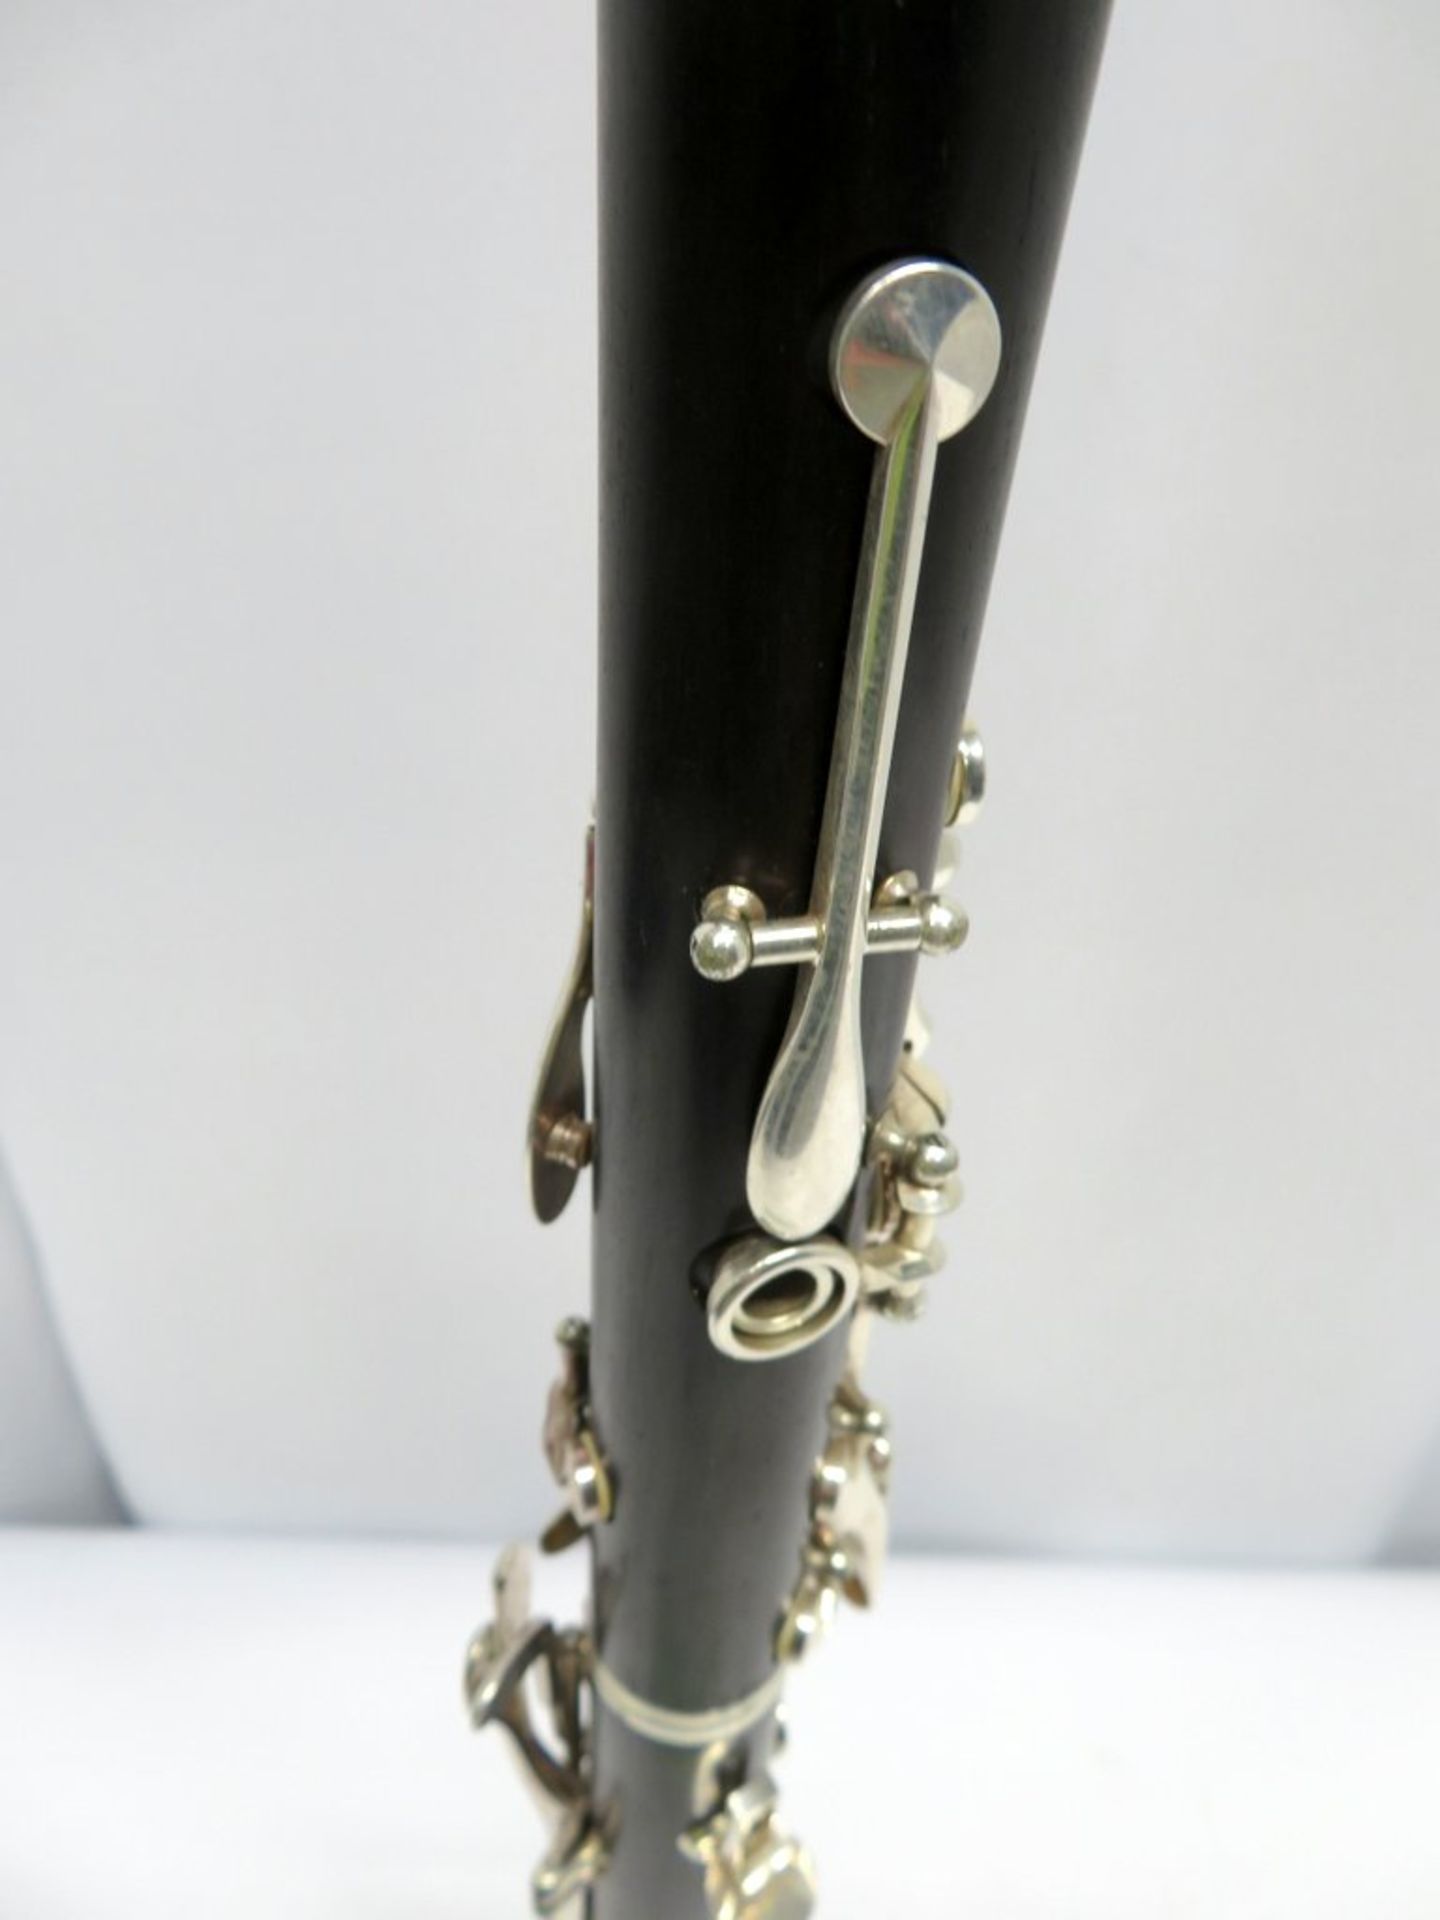 Buffet Crampon Clarinet Complete With Case. - Image 11 of 13